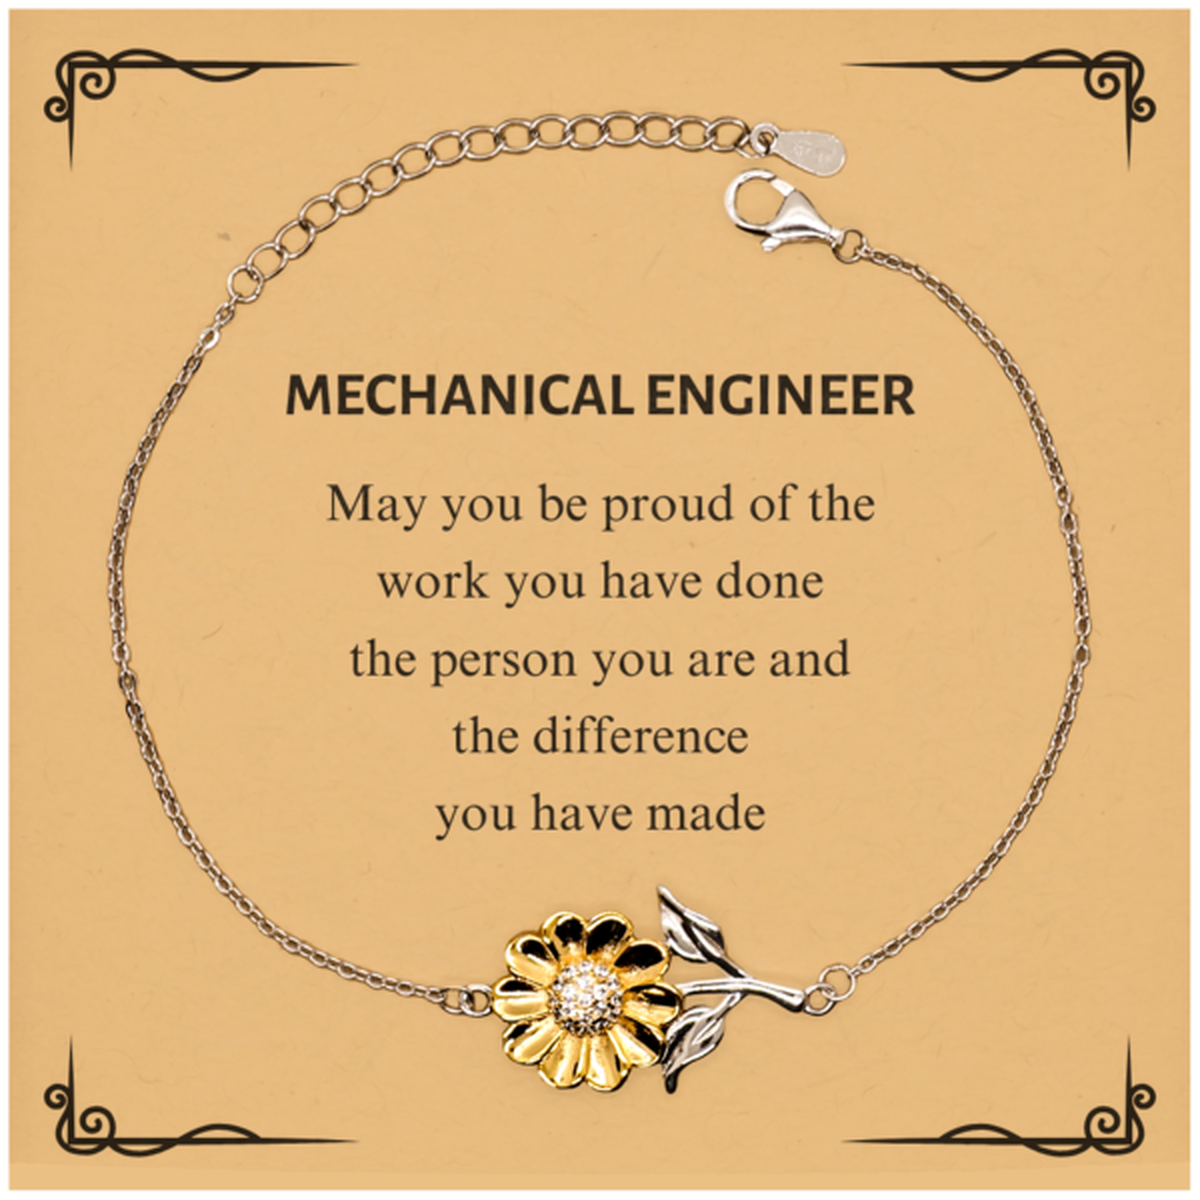 Mechanical Engineer May you be proud of the work you have done, Retirement Mechanical Engineer Sunflower Bracelet for Colleague Appreciation Gifts Amazing for Mechanical Engineer